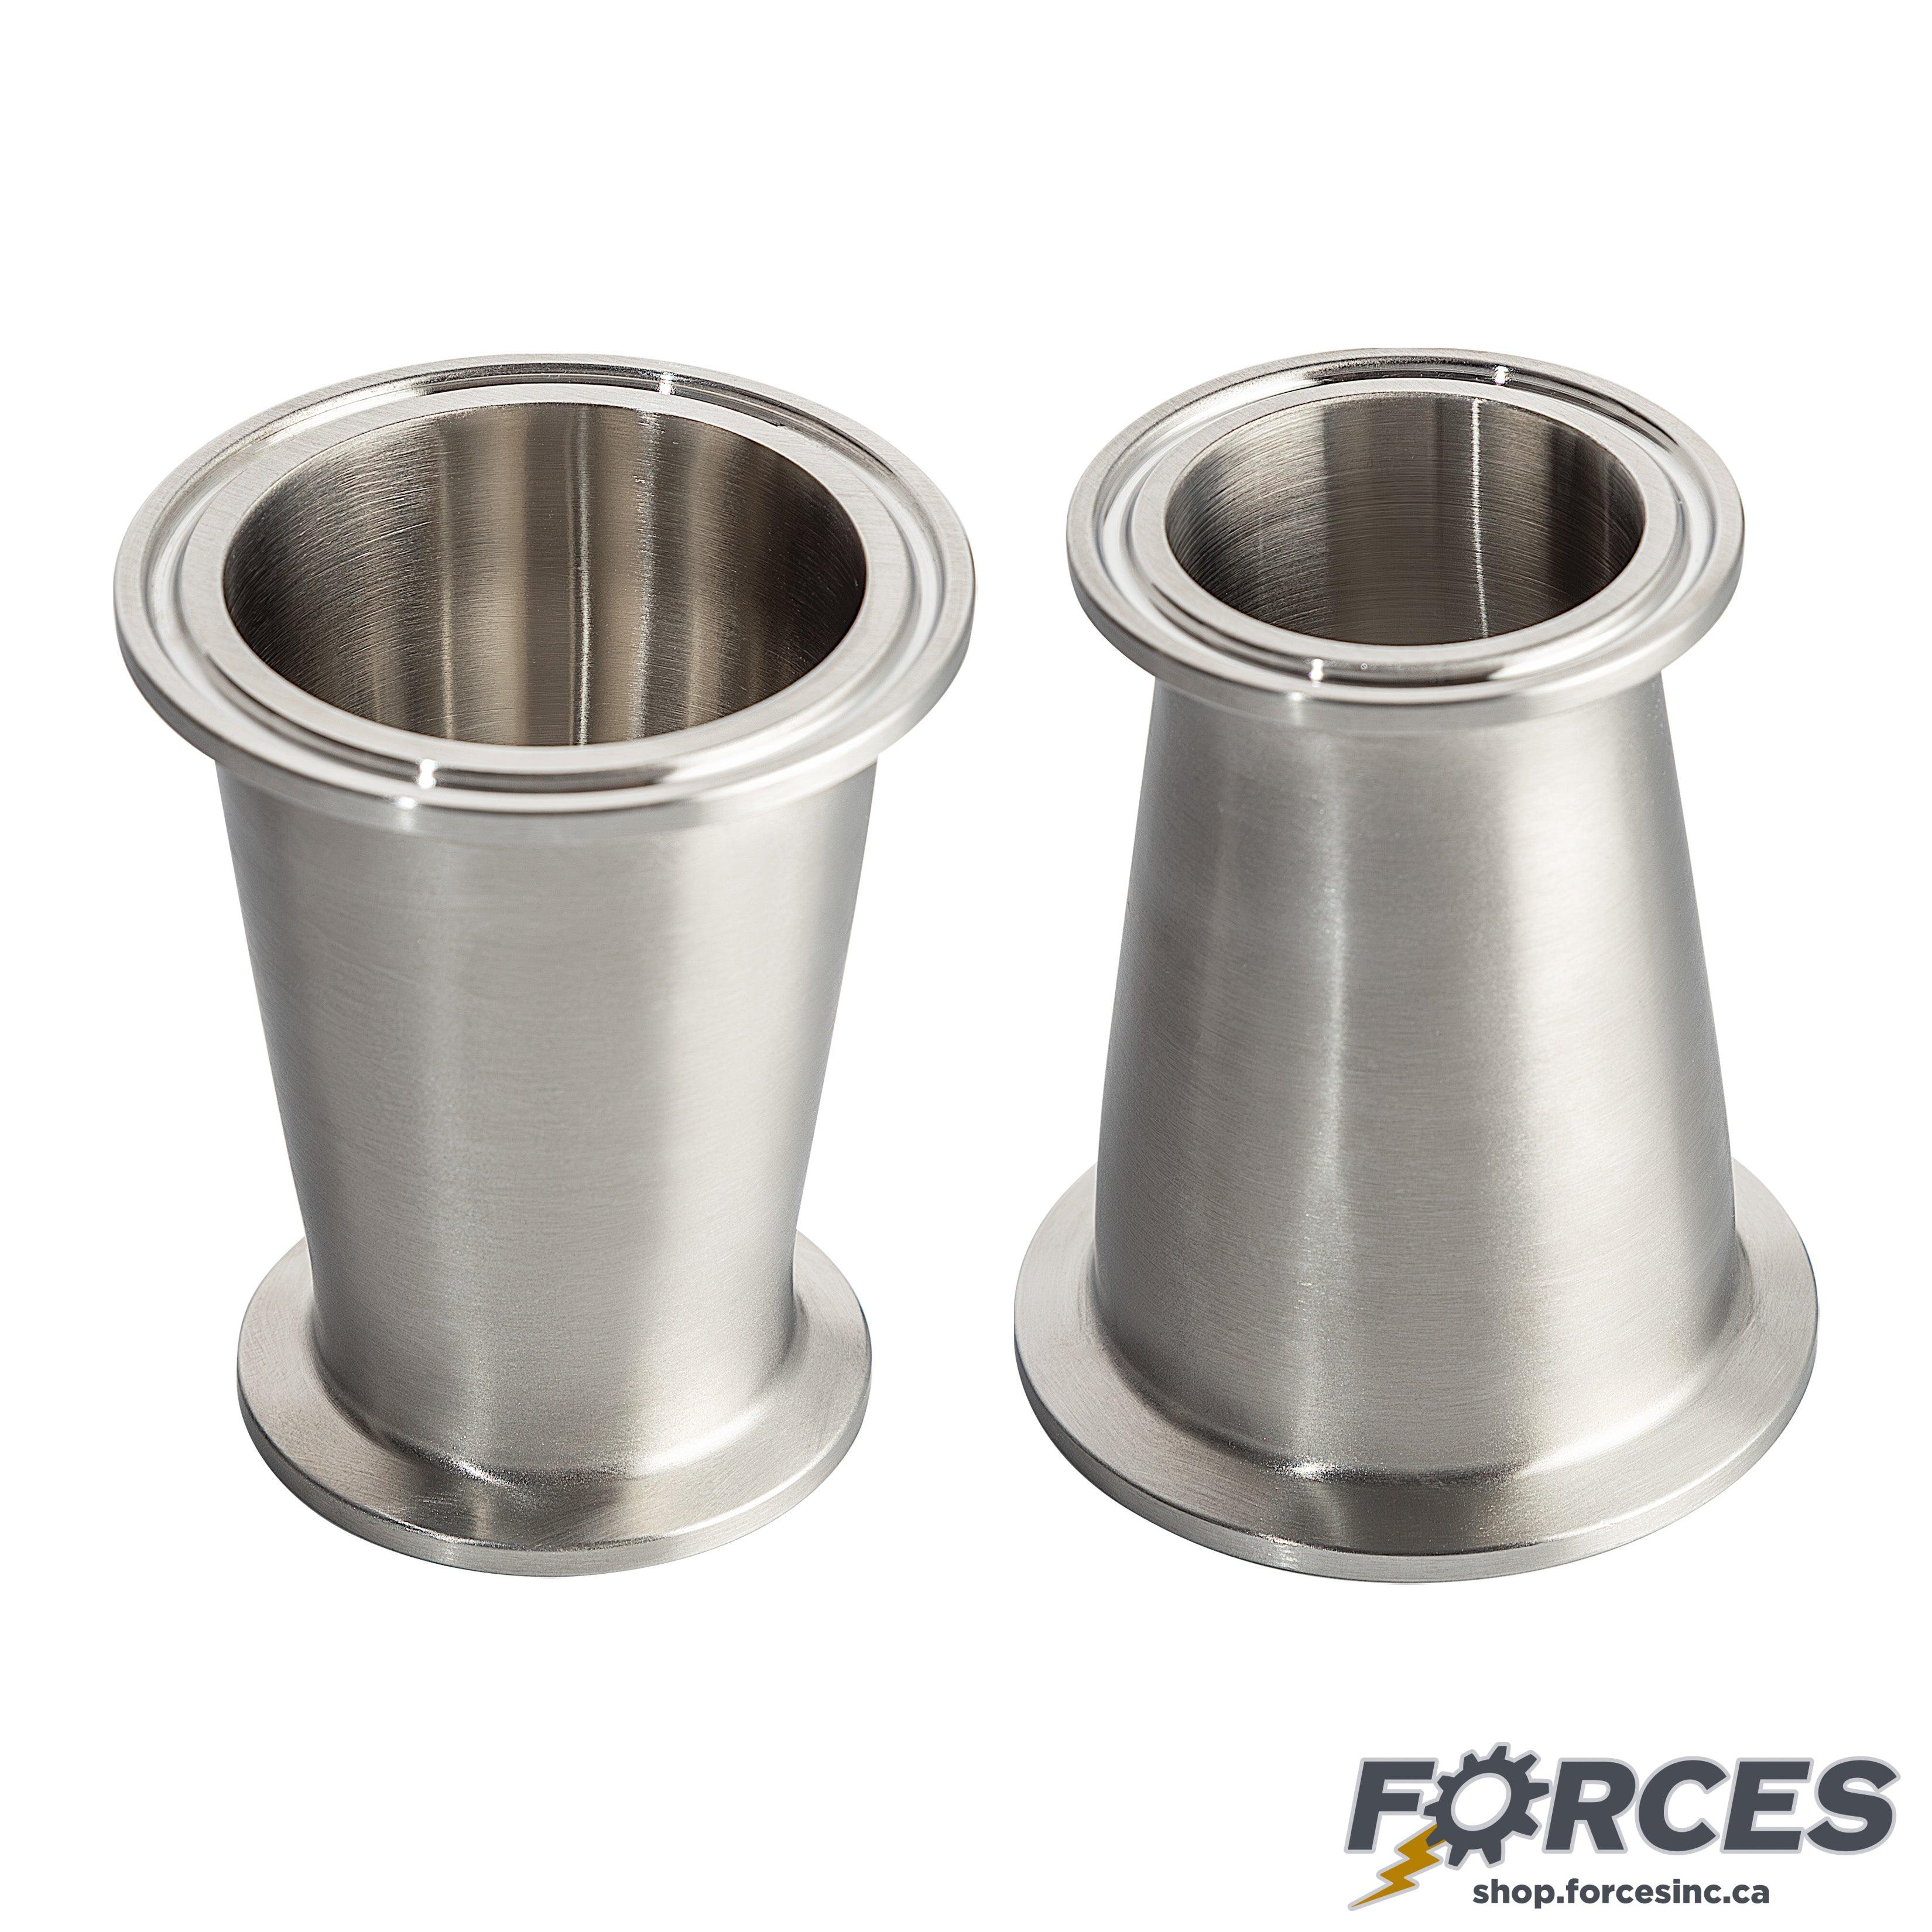 4" x 3" Tri-Clamp Concentric Reducer - Stainless Steel 304 - Forces Inc